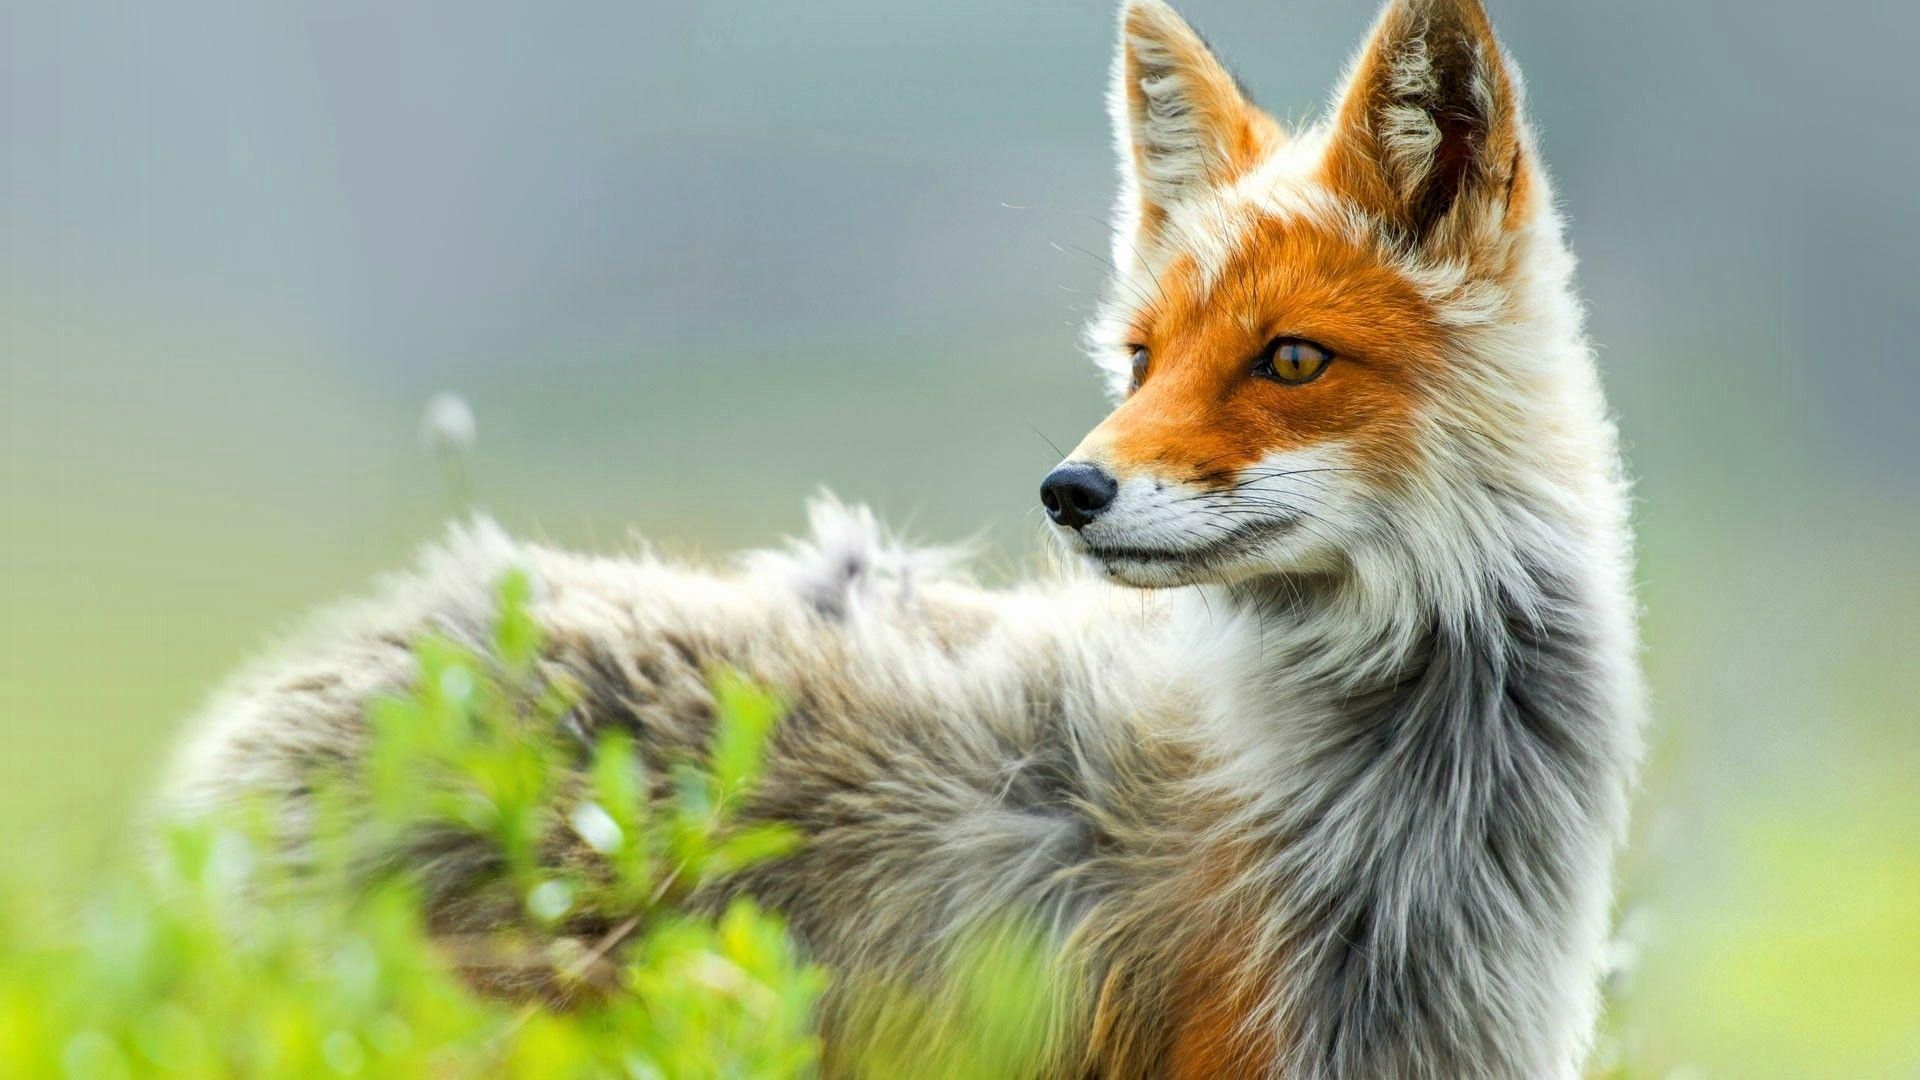 Red Fox Wallpaper Awesome Red Foxes Wallpaper Pets Cute and Docile 2019 of The Hudson